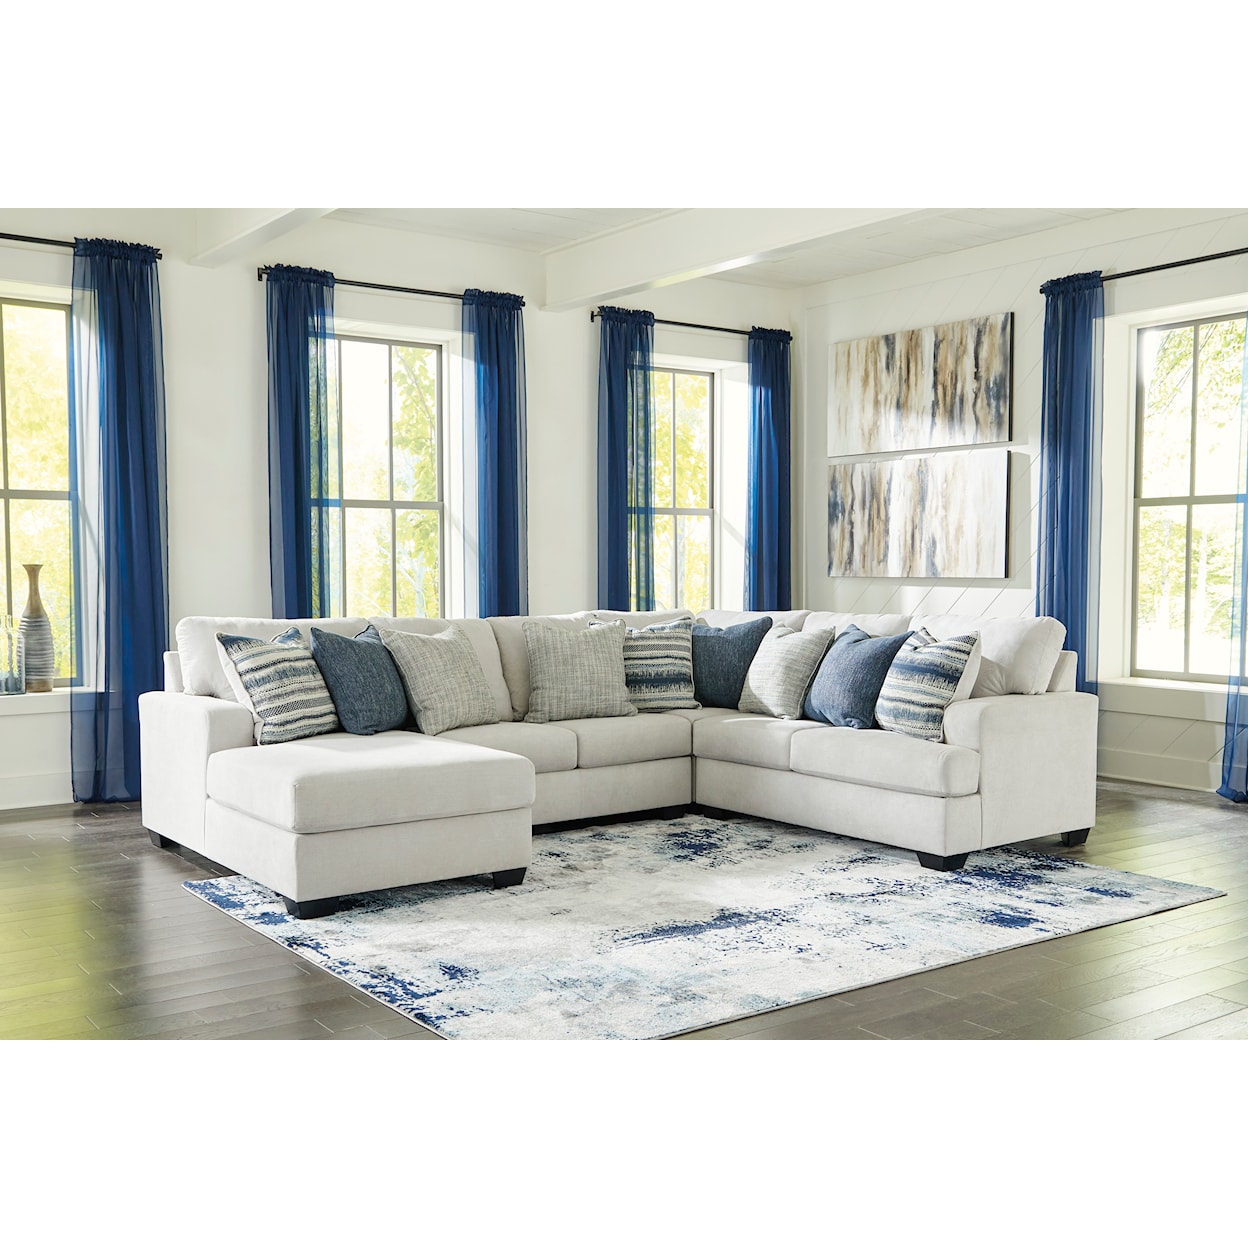 Benchcraft by Ashley Lowder 4-Piece Sectional with Chaise